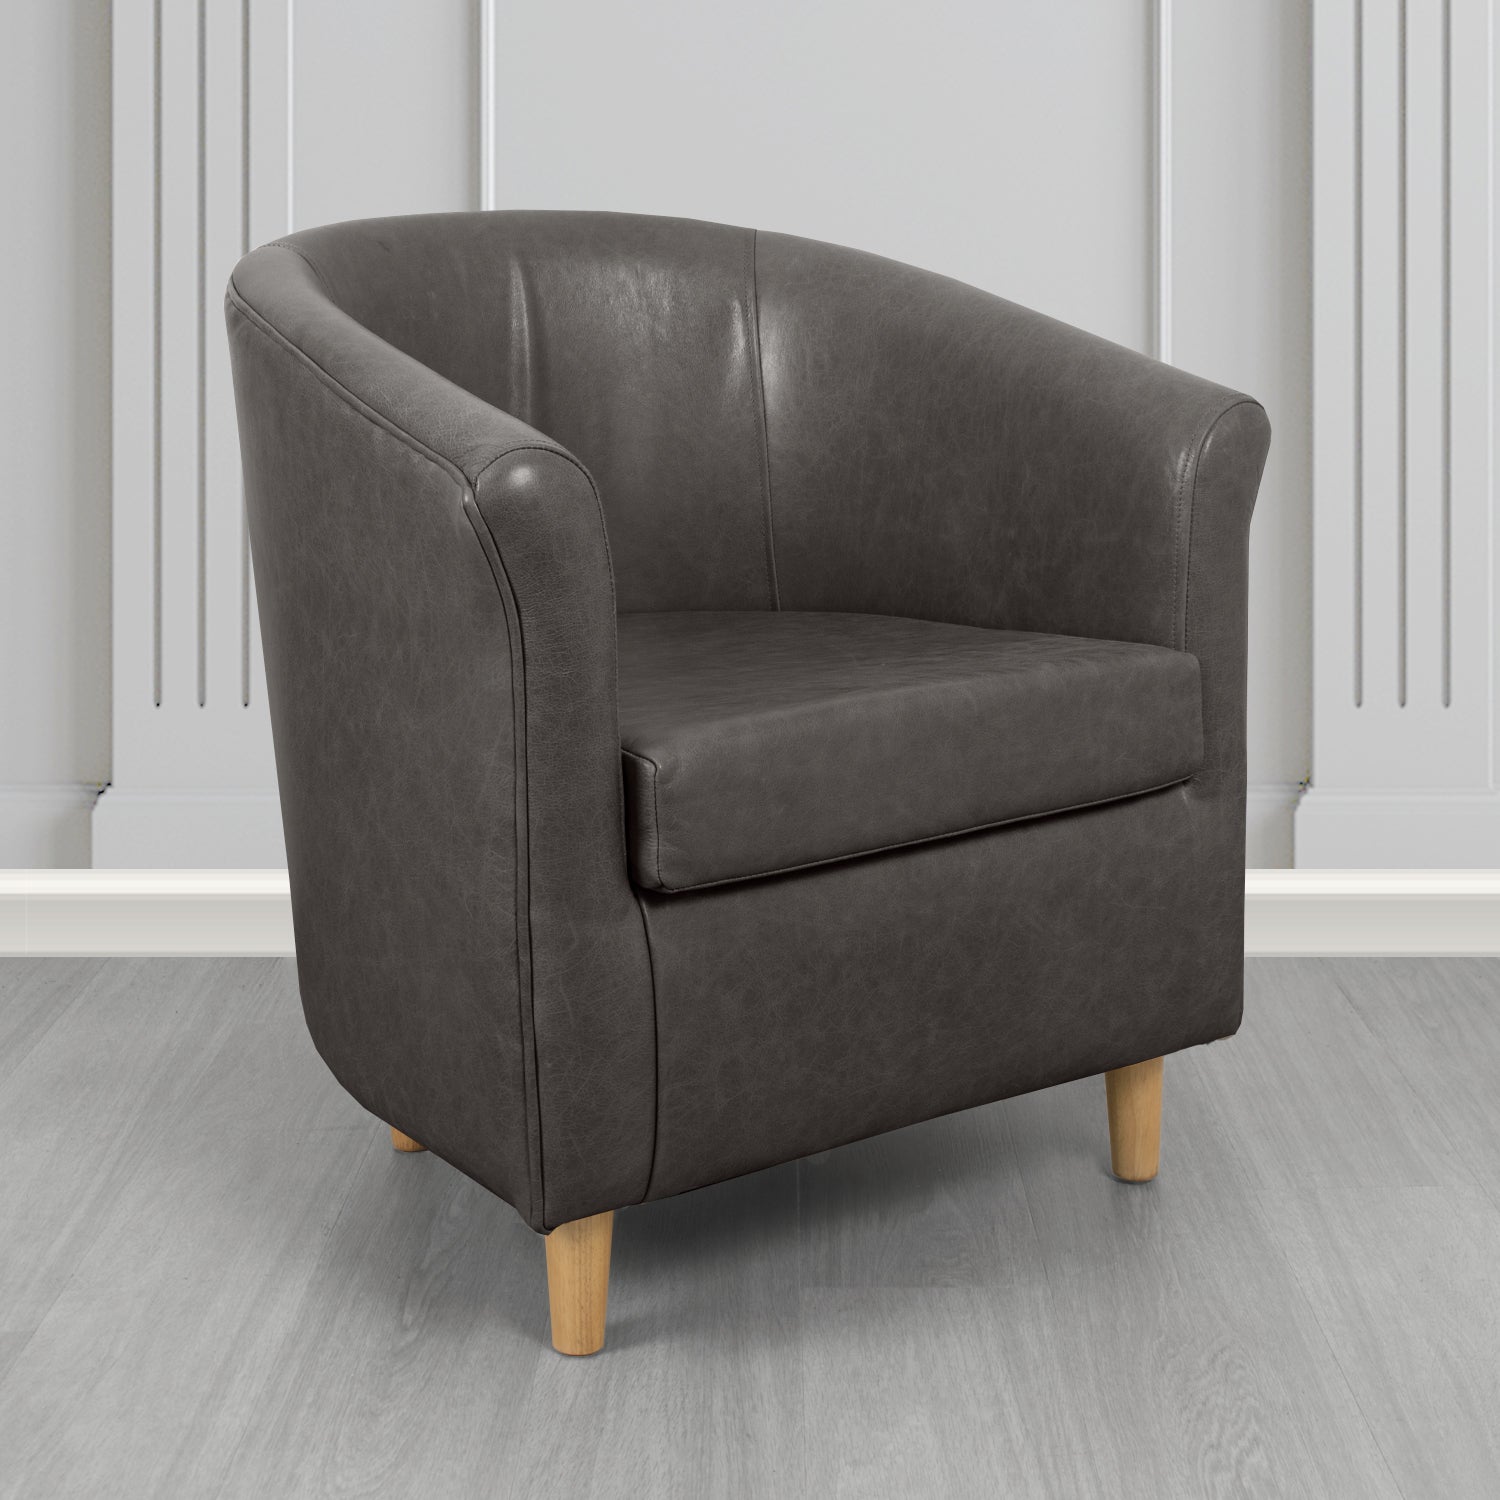 Tuscany Tub Chair in Crib 5 Old English Storm Genuine Leather - The Tub Chair Shop